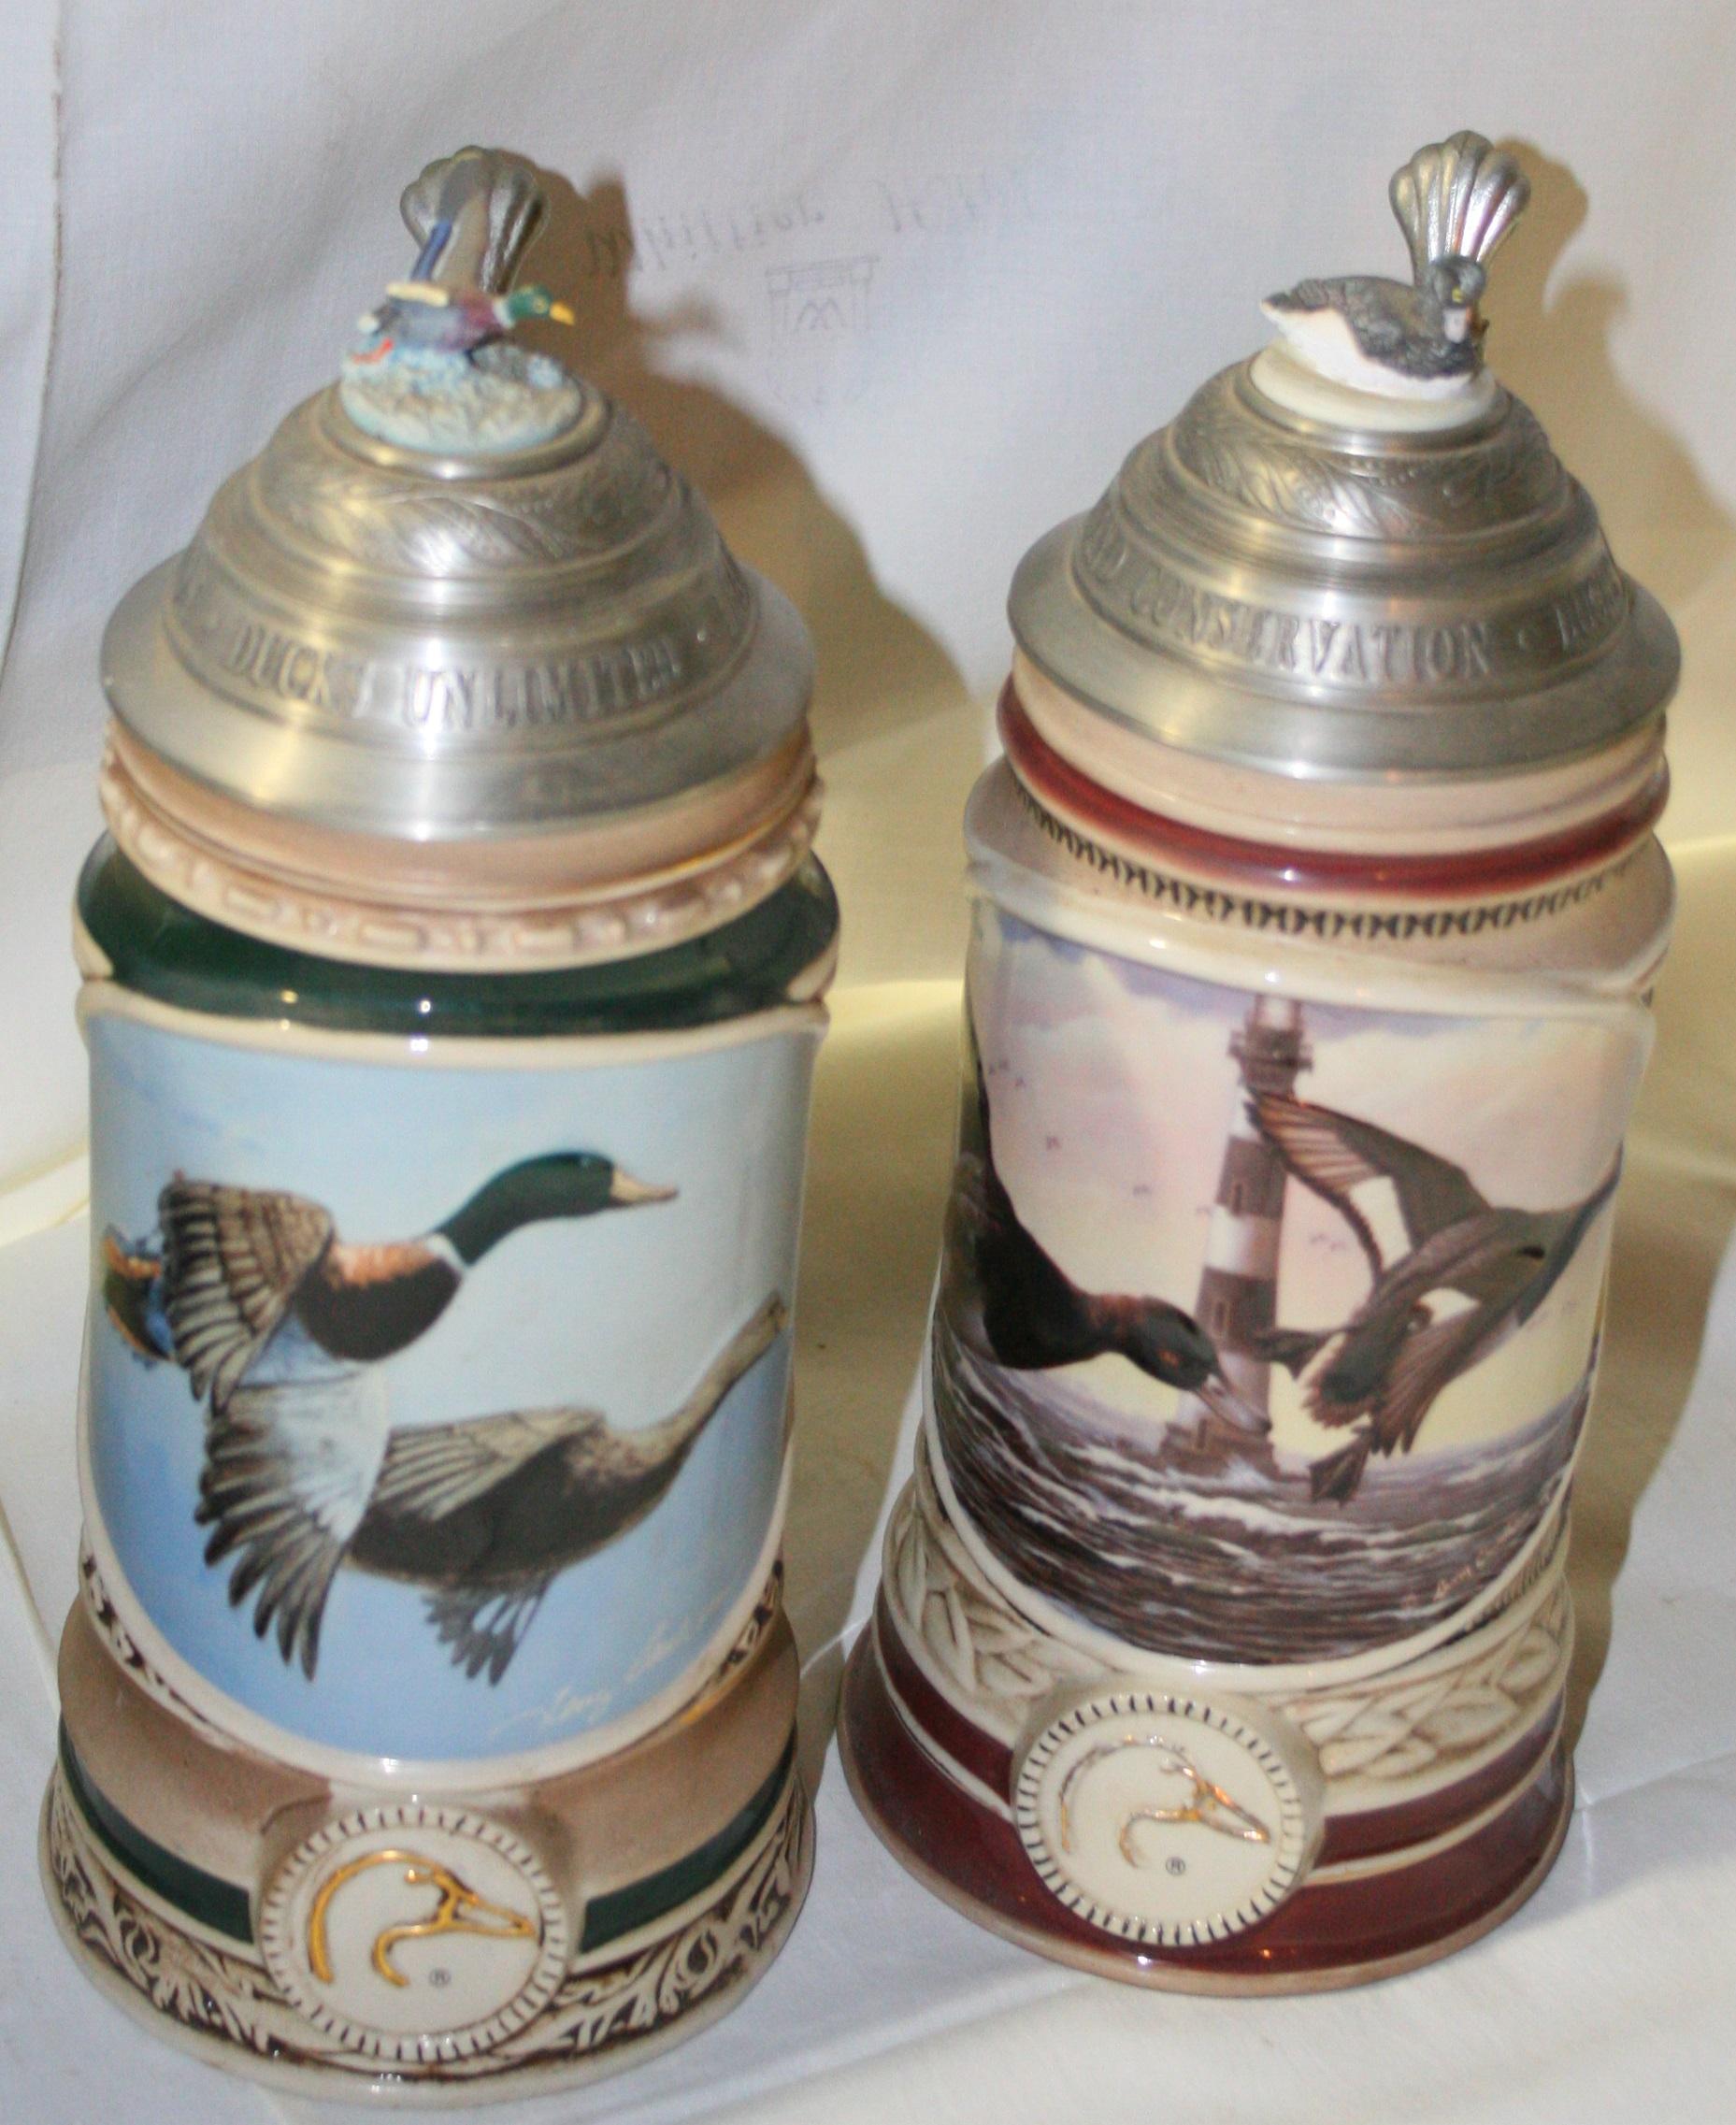 4 DUCKS UNLIMITED WATERFOWL OF NORTH AMERICA STEINS - 4 TIMES MONEY